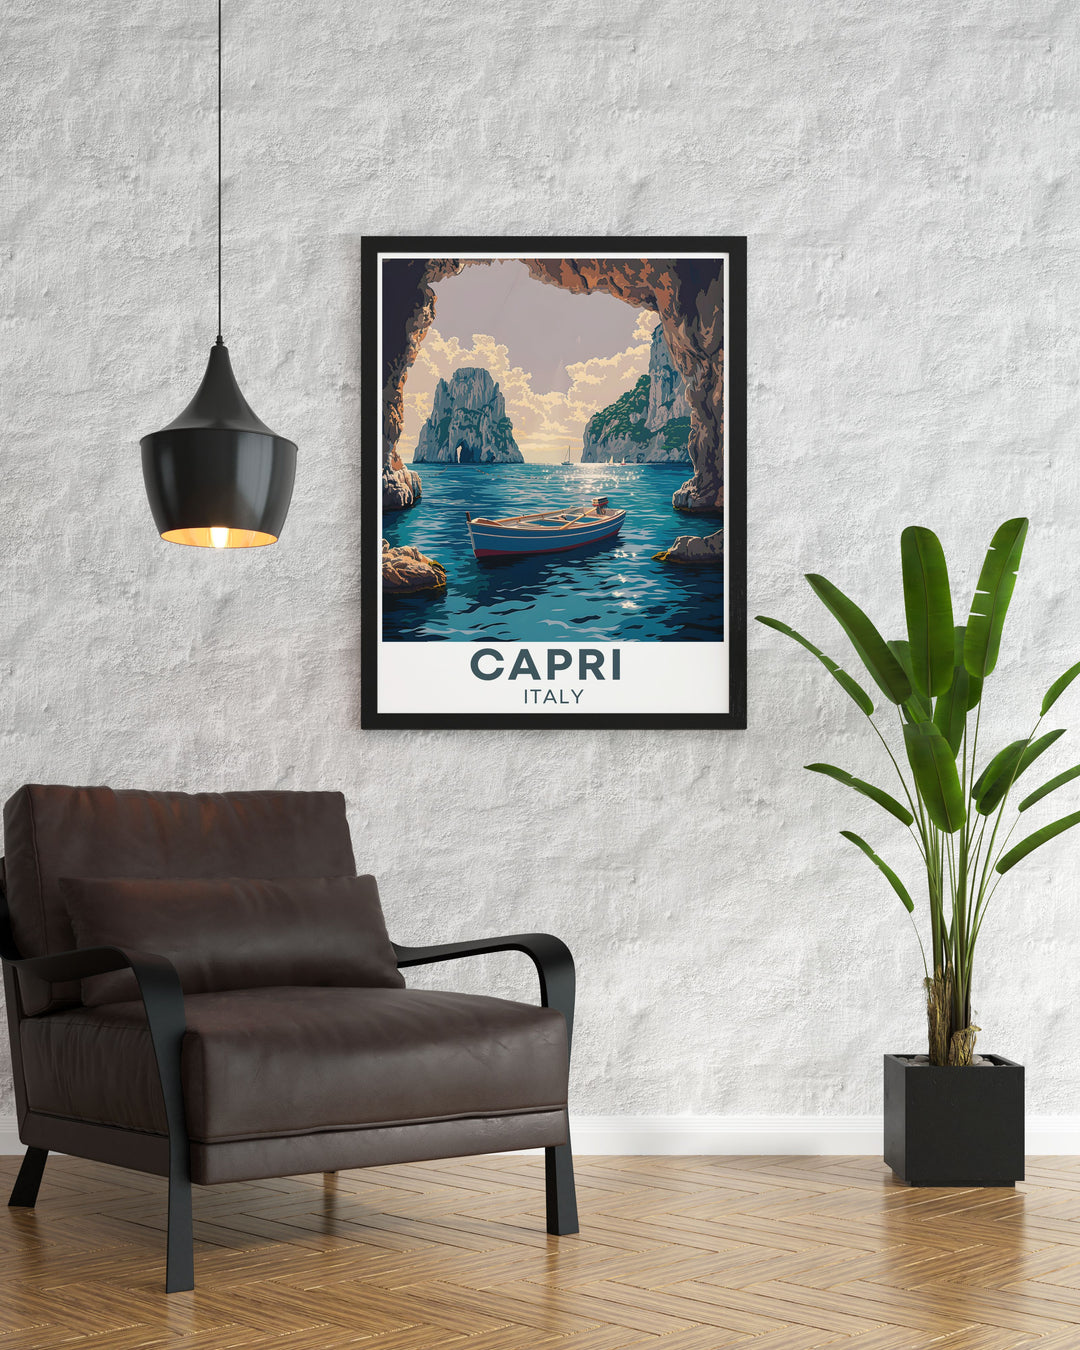 Showcasing the enchanting island of Capri, this travel poster highlights the dramatic cliffs and lush gardens that make it a favorite retreat. Ideal for adding a touch of Italian charm to your home decor and celebrating the islands natural beauty.